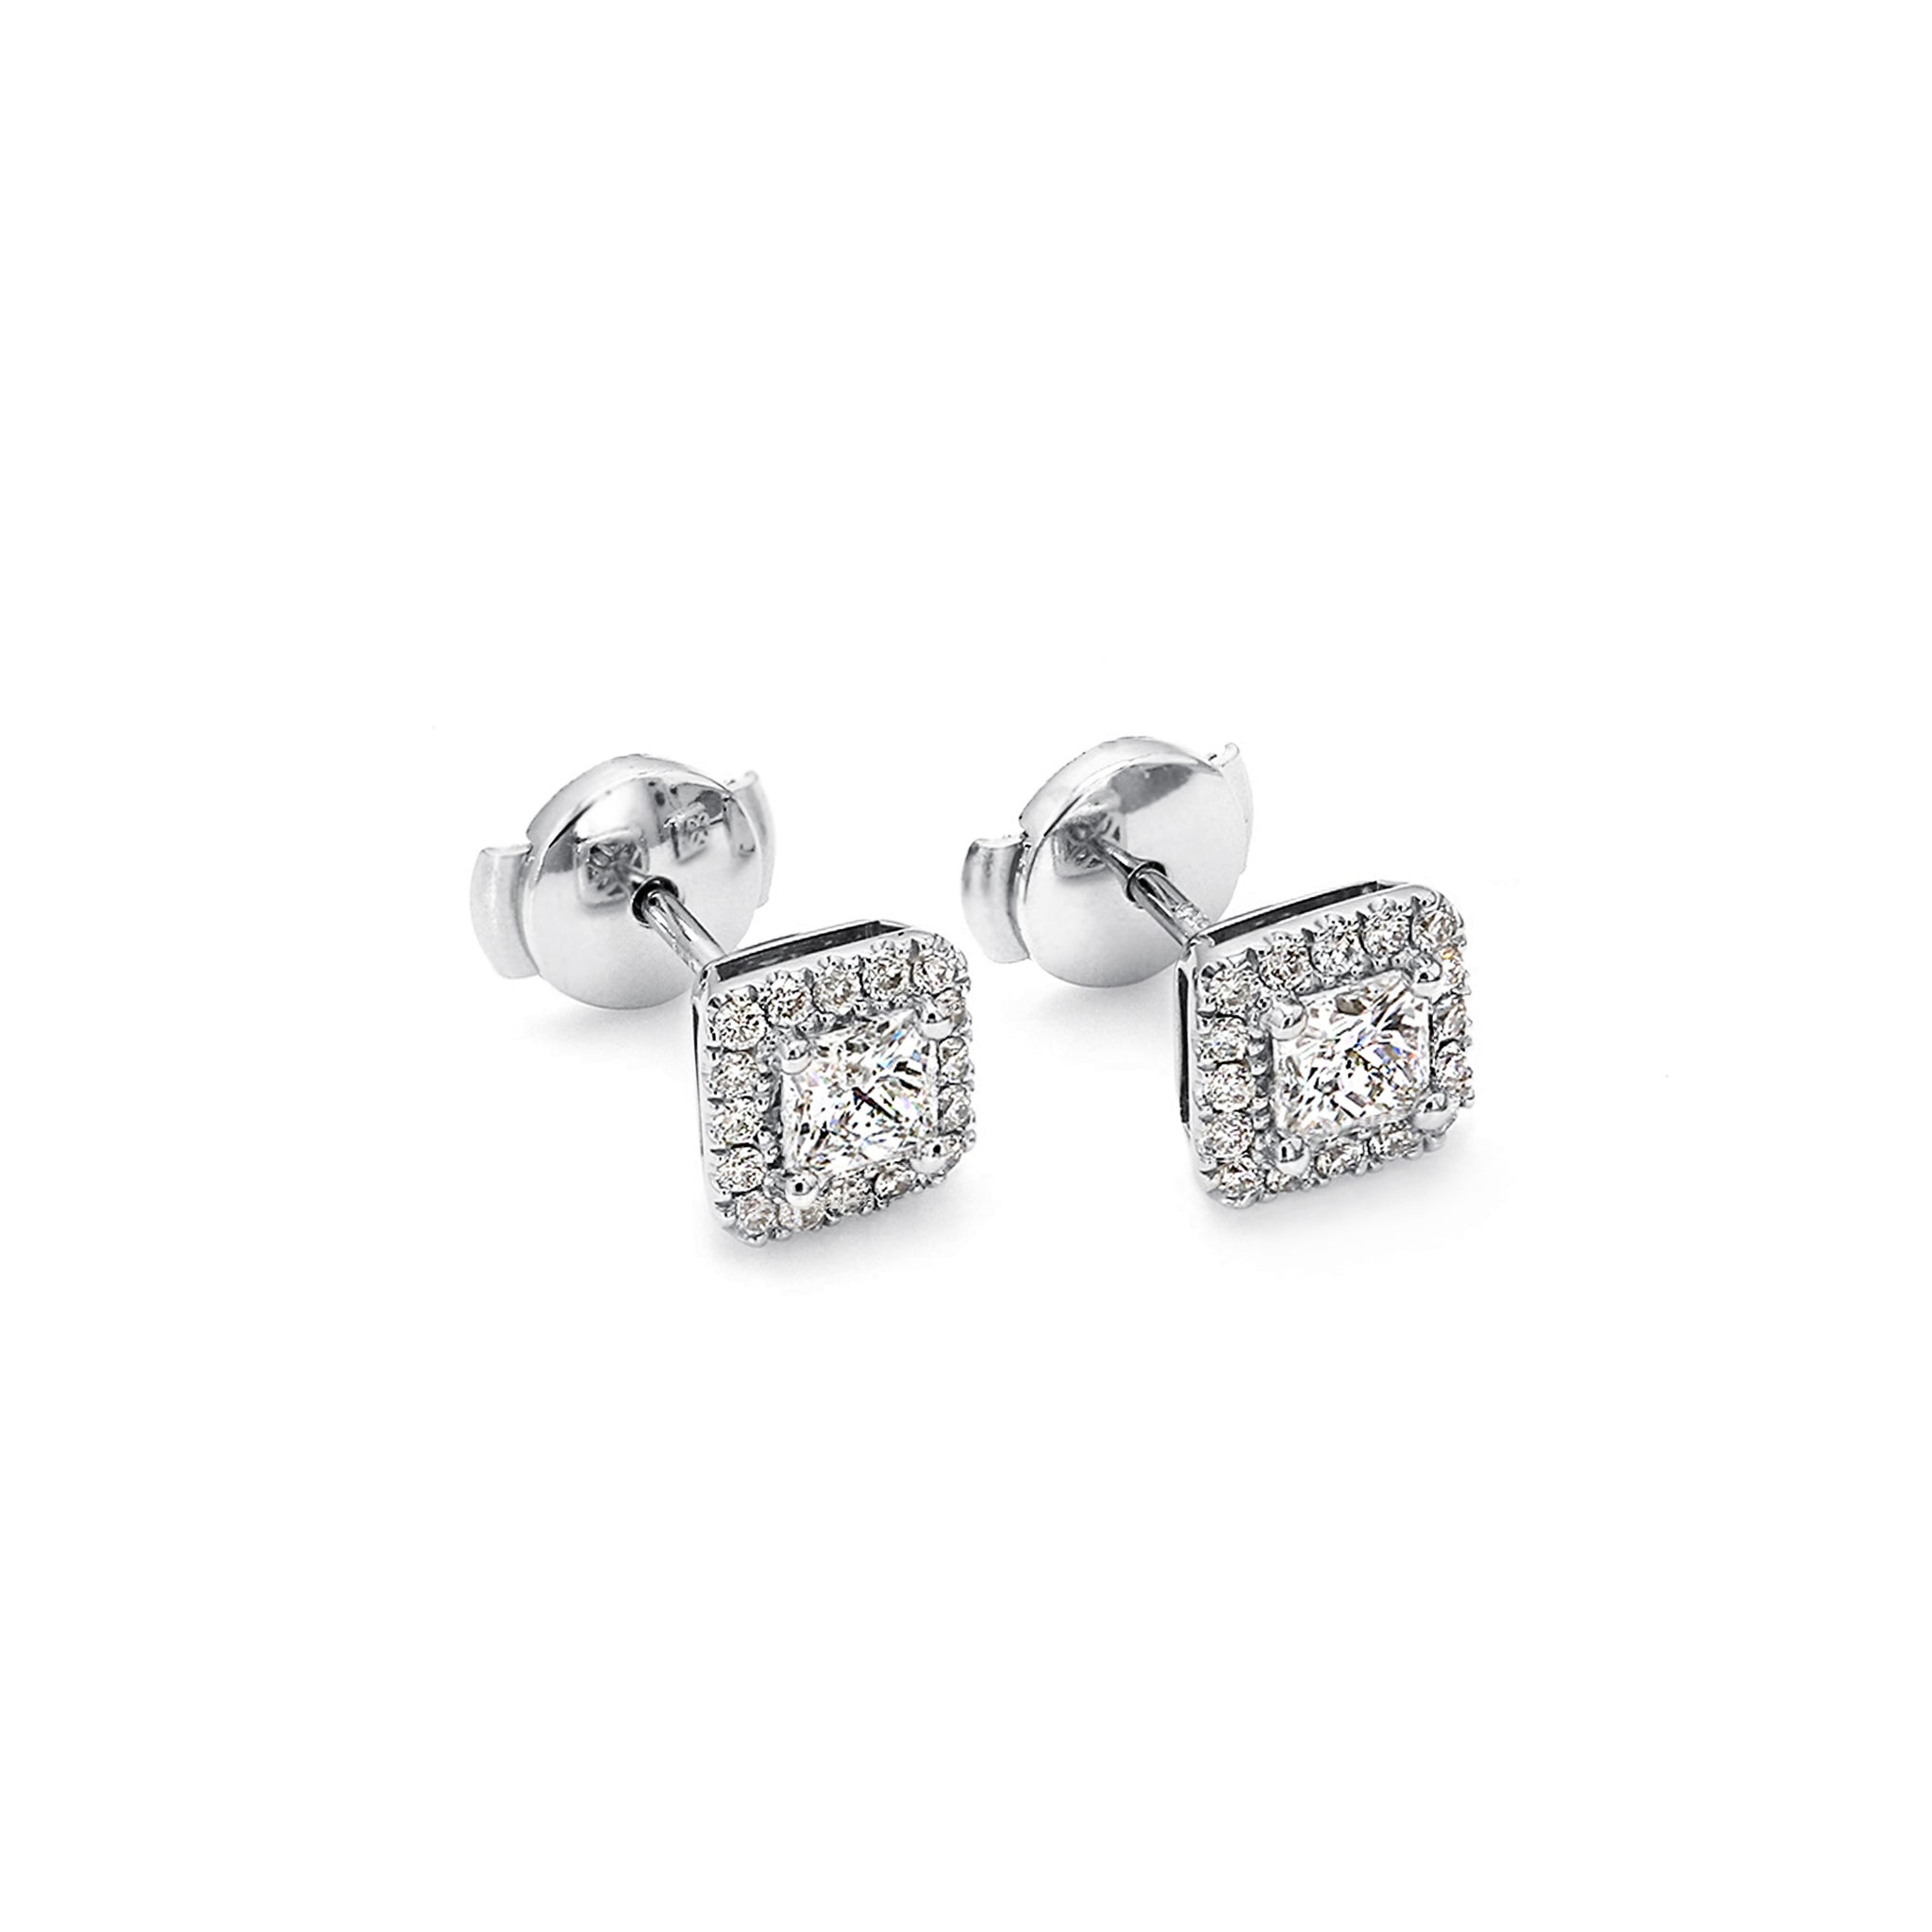 Shimansky - My Girl Diamond Halo Earrings 0.40 Carat Crafted in Platinum 3D View